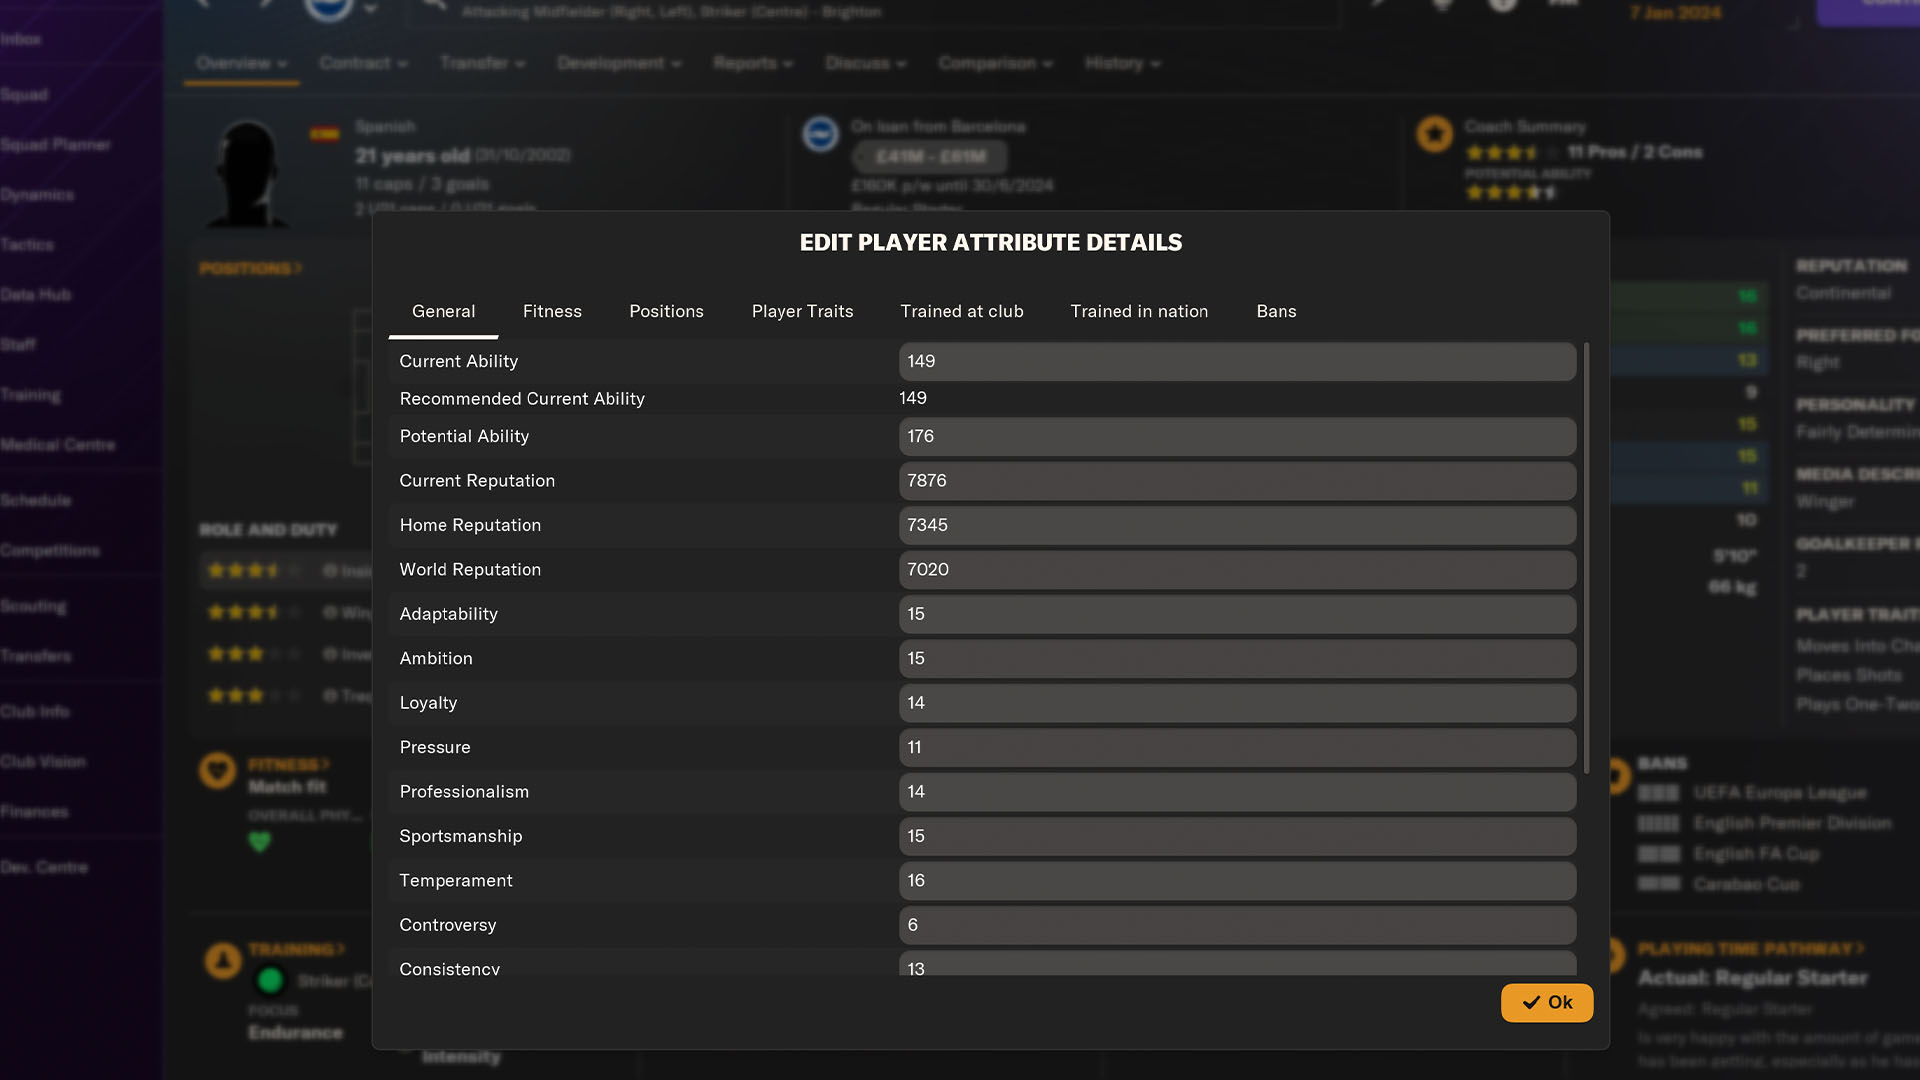 Football Manager 2024 In-game Editor on Steam